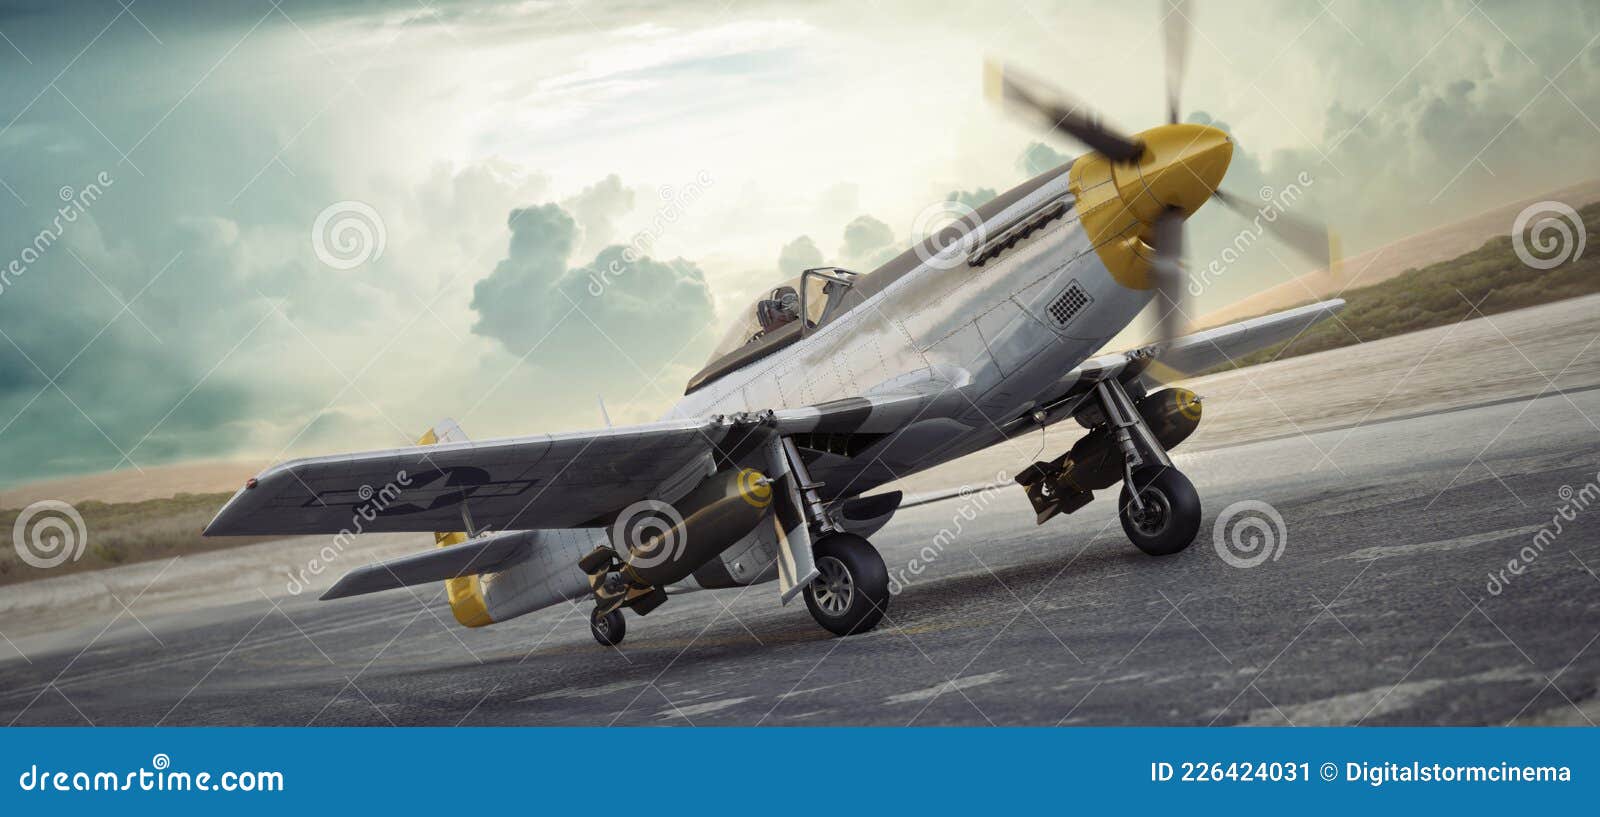 elite vintage aircraft the legendary p51 mustang taxiing down the runway towards its world war 2 mission.